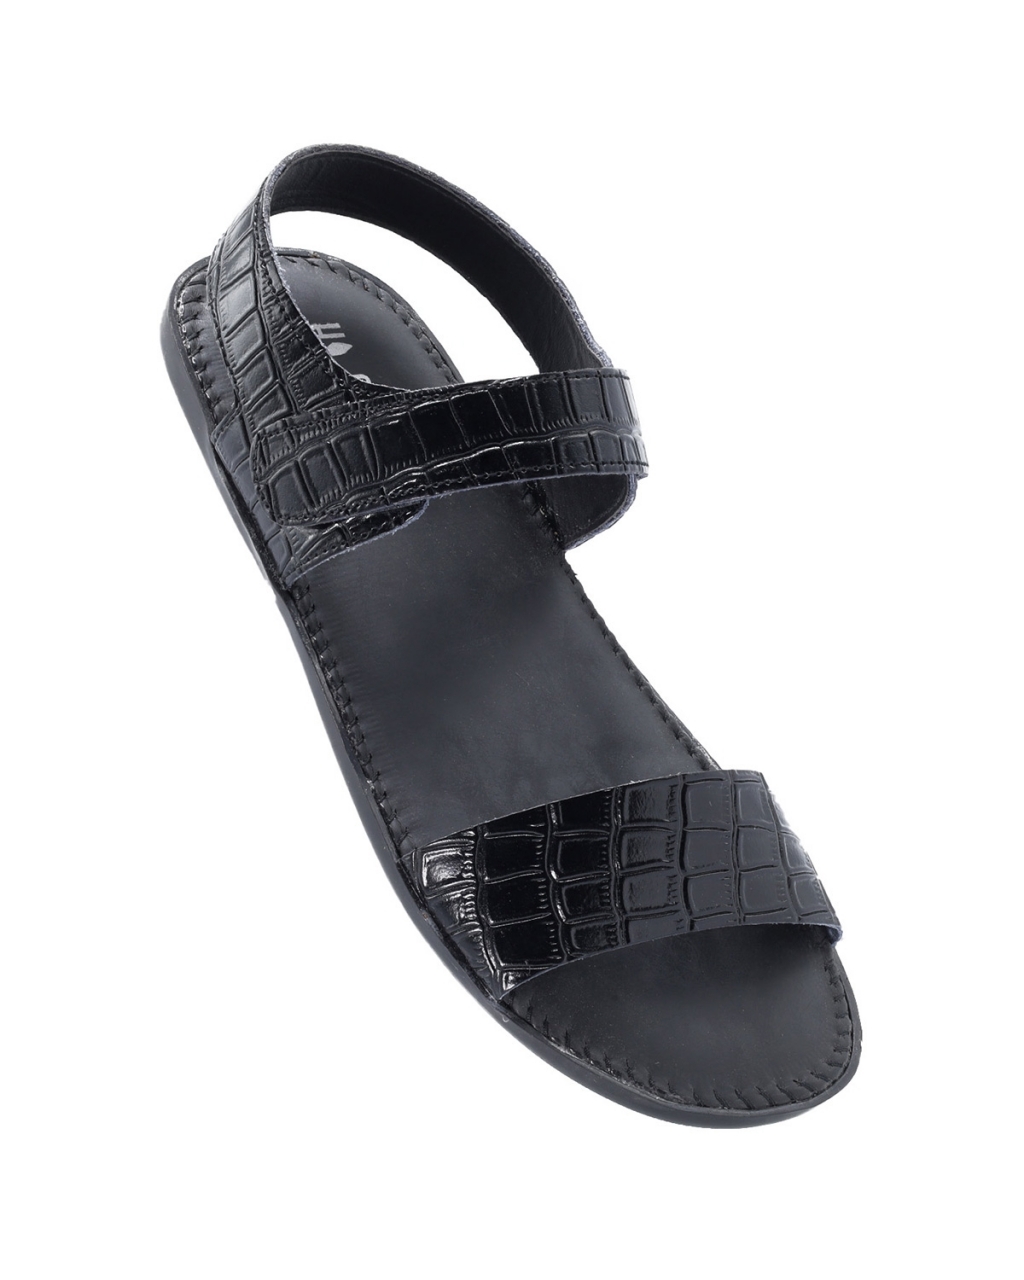 Aerosoft Synthetic Leather Sandals For Men A4805 Price in Pakistan - View  Latest Collection of Sandals